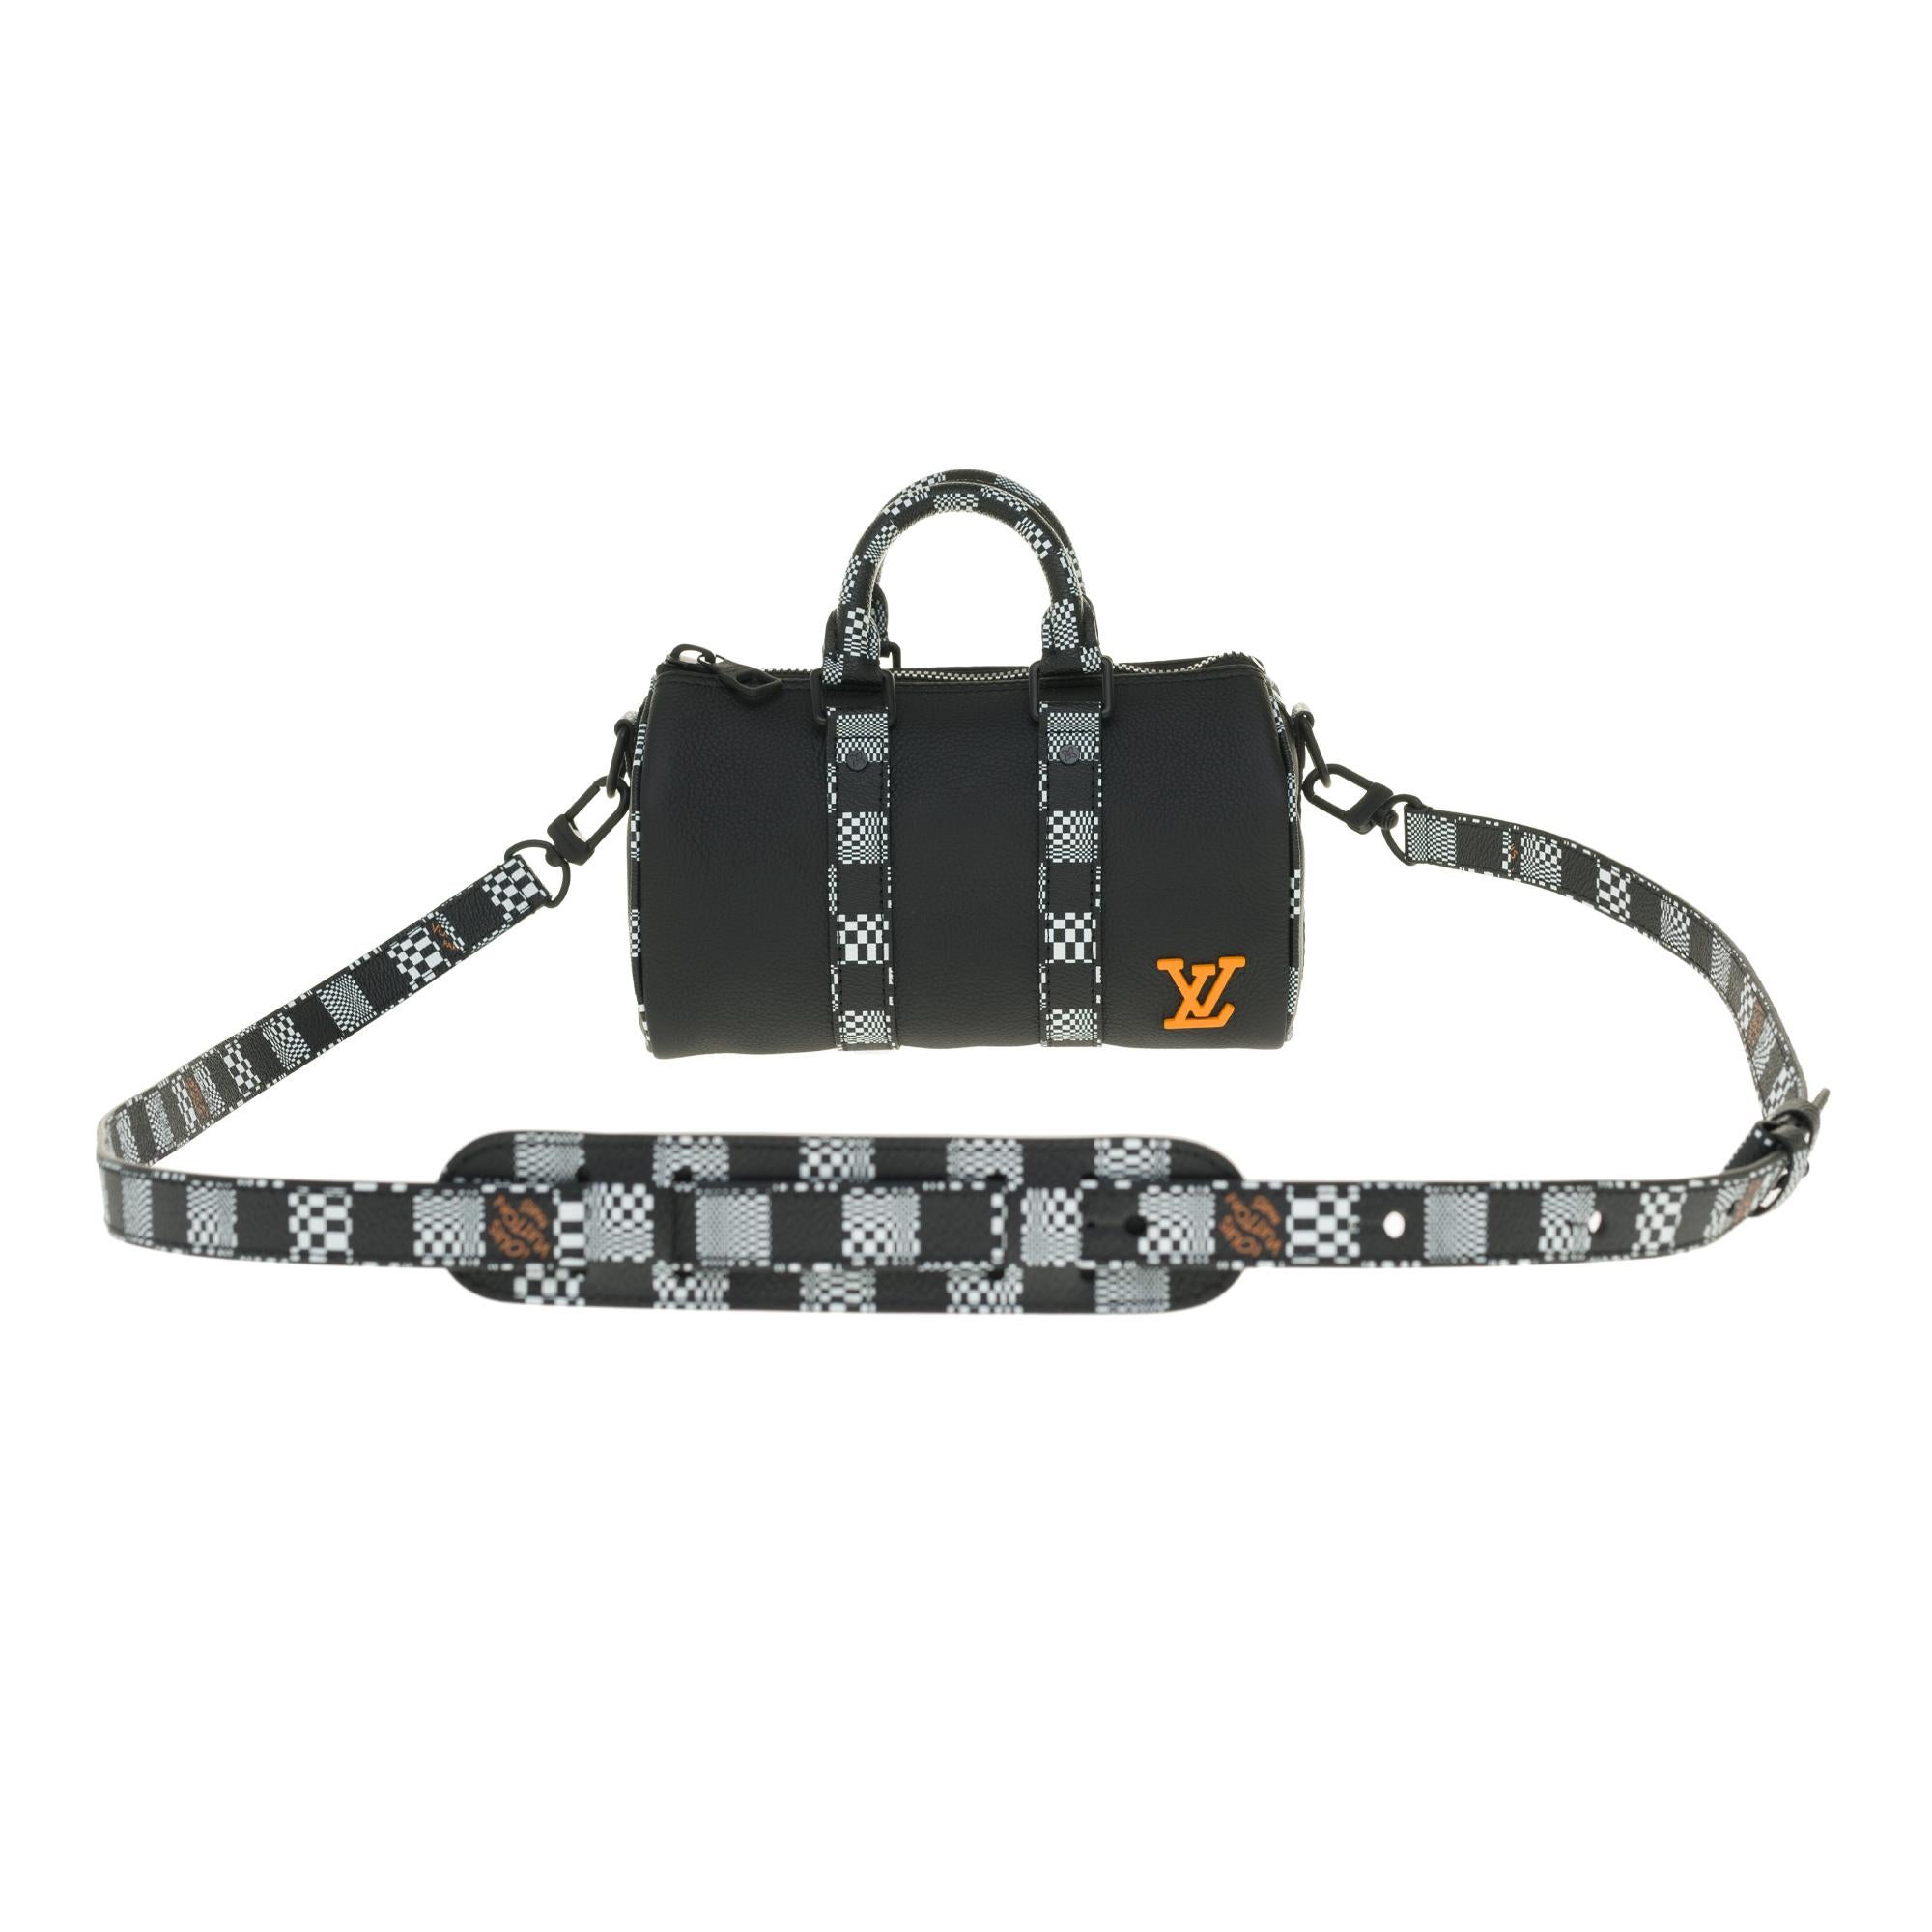 LIMITED EDITION - SOLD OUT -MEN FASHION SHOW SPRING/SUMMER 2021


Virgil Abloh miniaturises the classic Keepall travel bag from 1930 to create this new Keepall Nano bag for the Spring-Summer 2021 collection. Crafted in black grained striped leather,